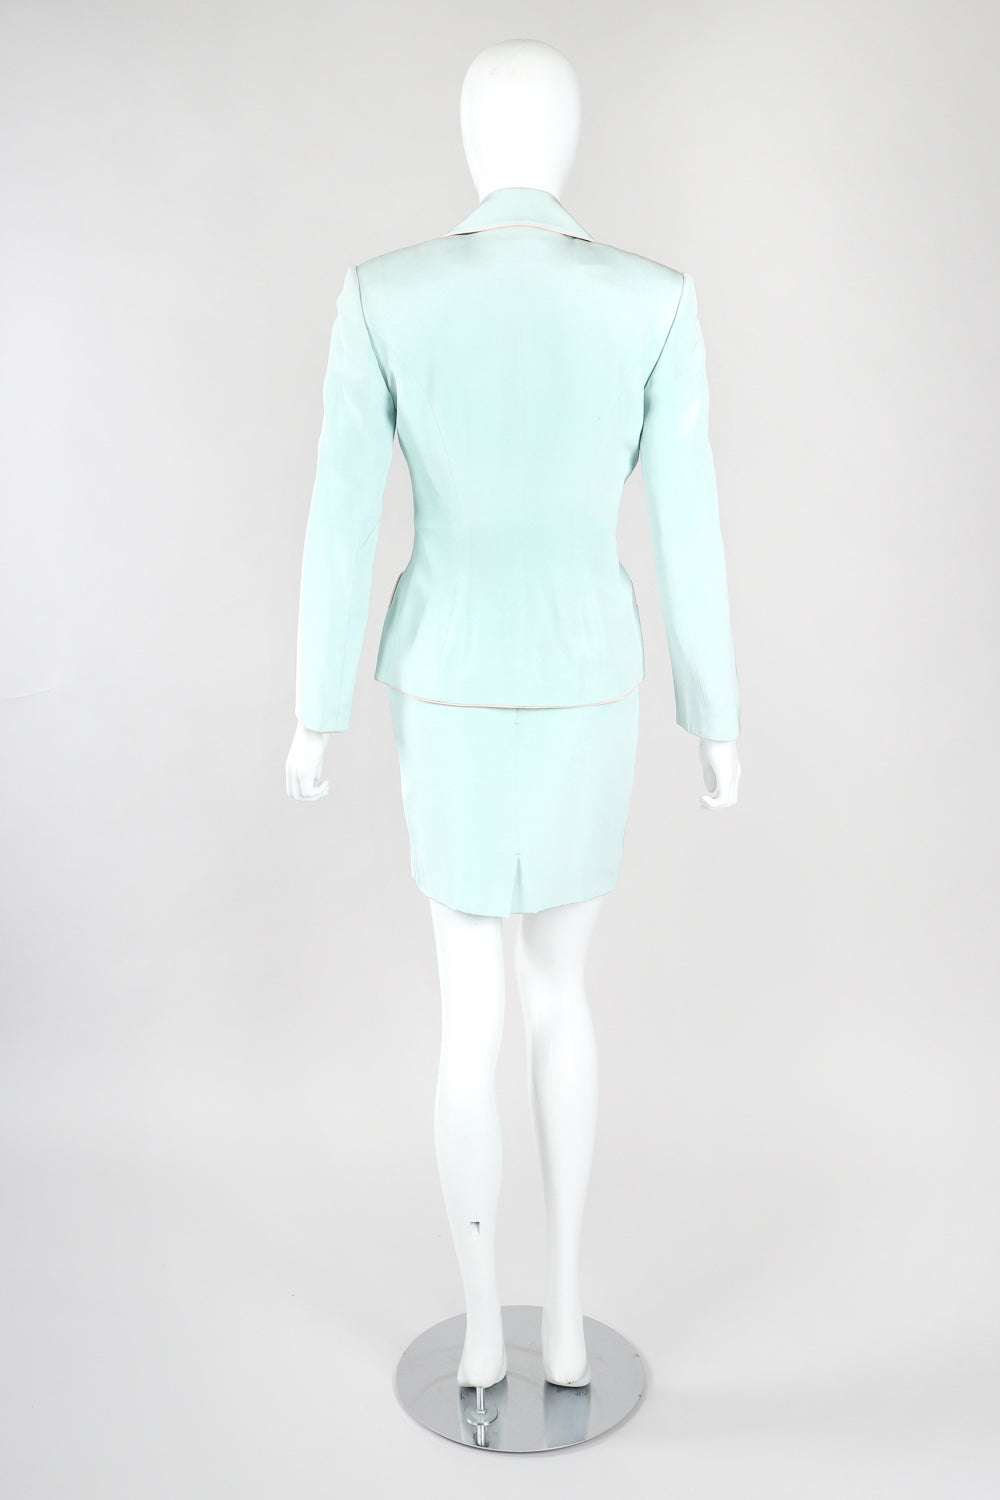 Recess Designer Consignment Vintage Richard Tyler Contrast Piped Silk Pajama Mint Jacket & Skirt Set Los Angeles Resale Recycled